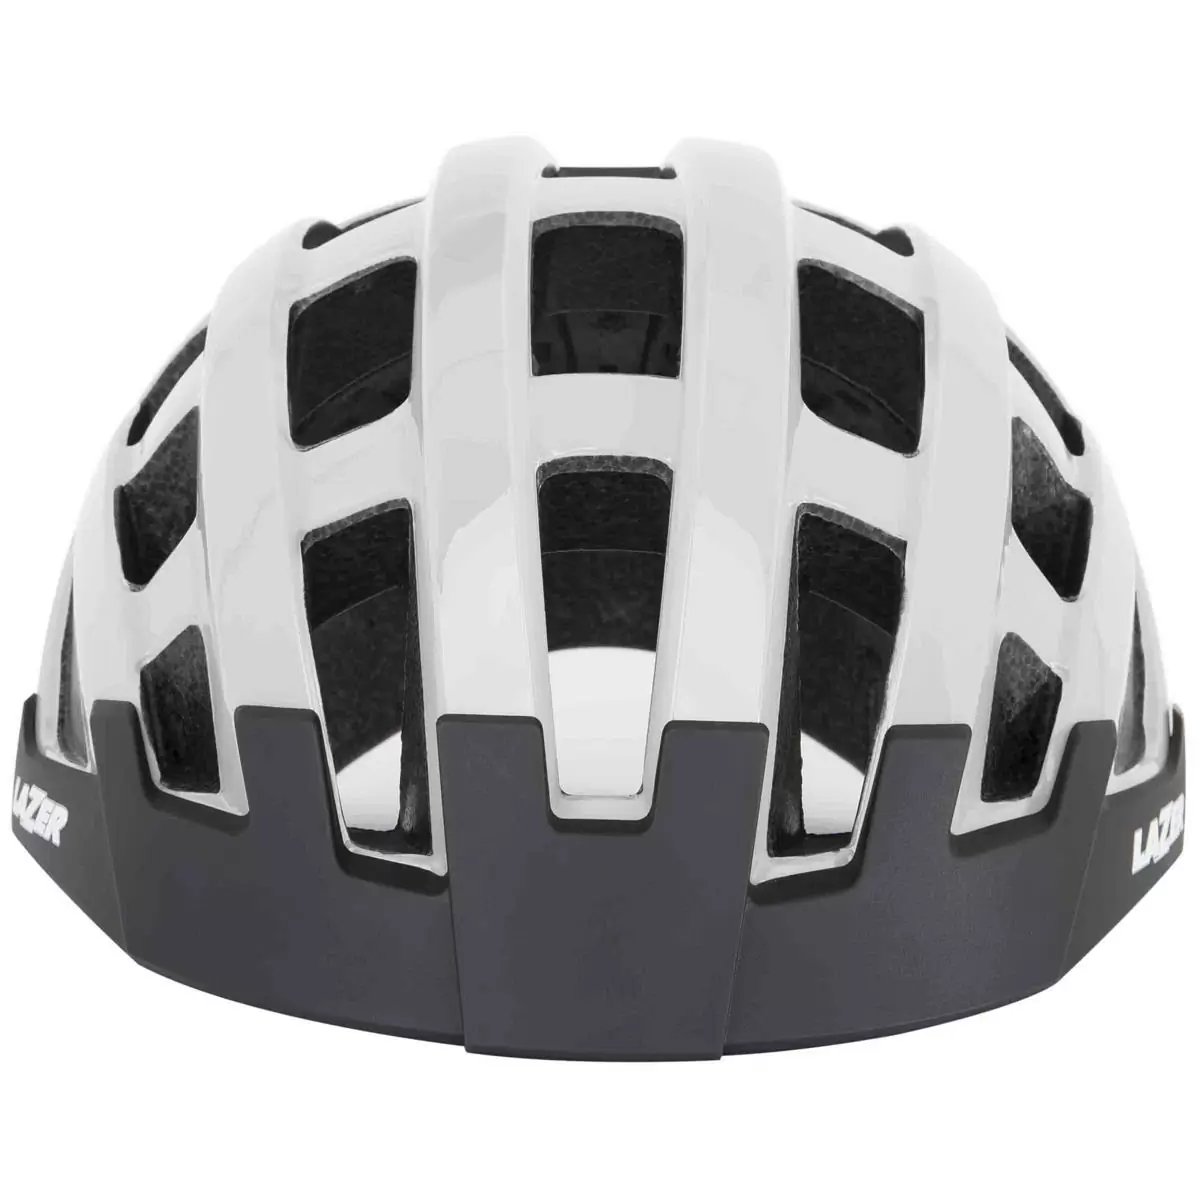 Helmet compact white one size (54-61) #1